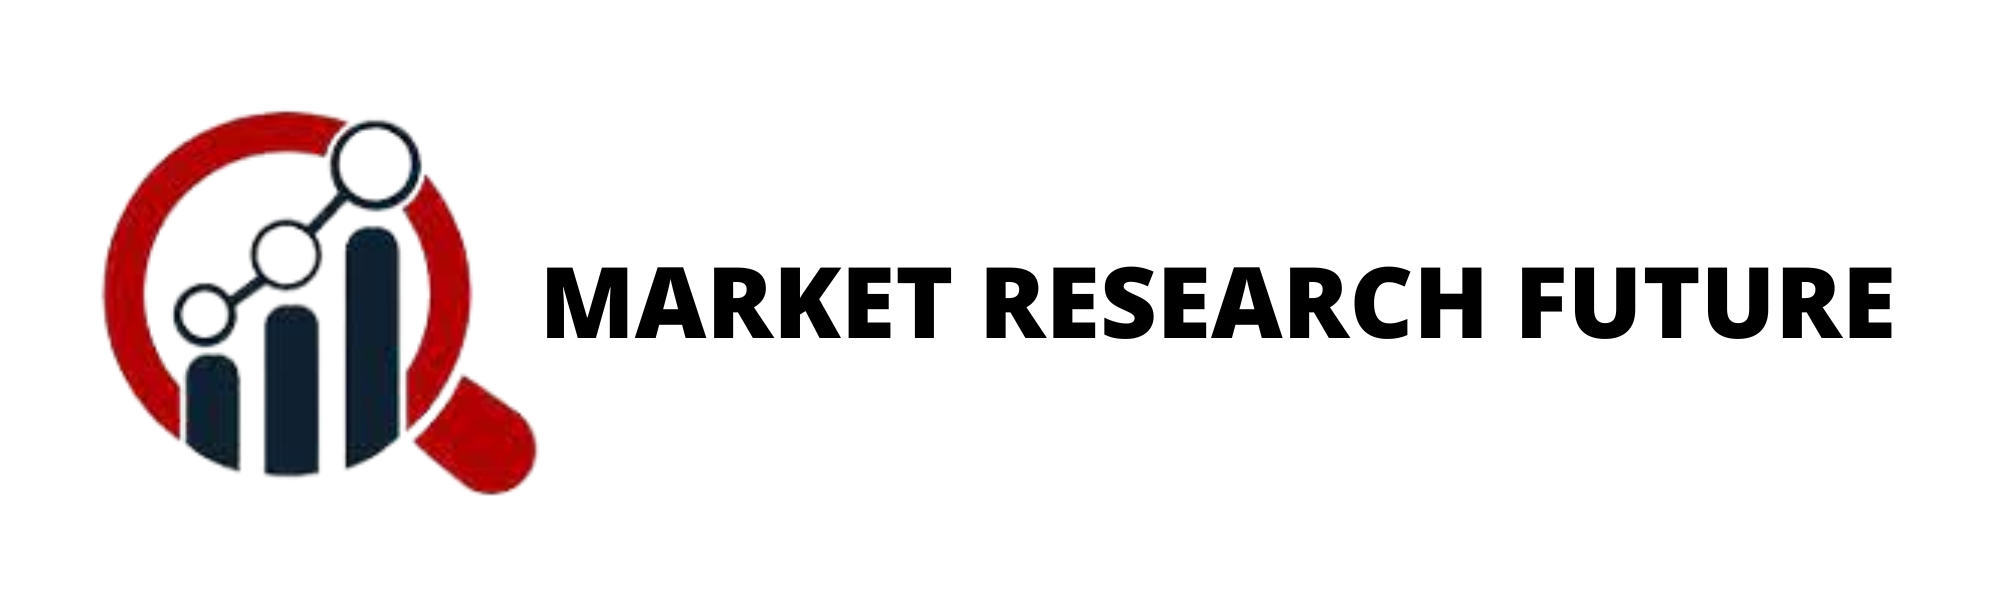 Isobutyl Acrylate Market Industry Shows Outlook And Analysis By...